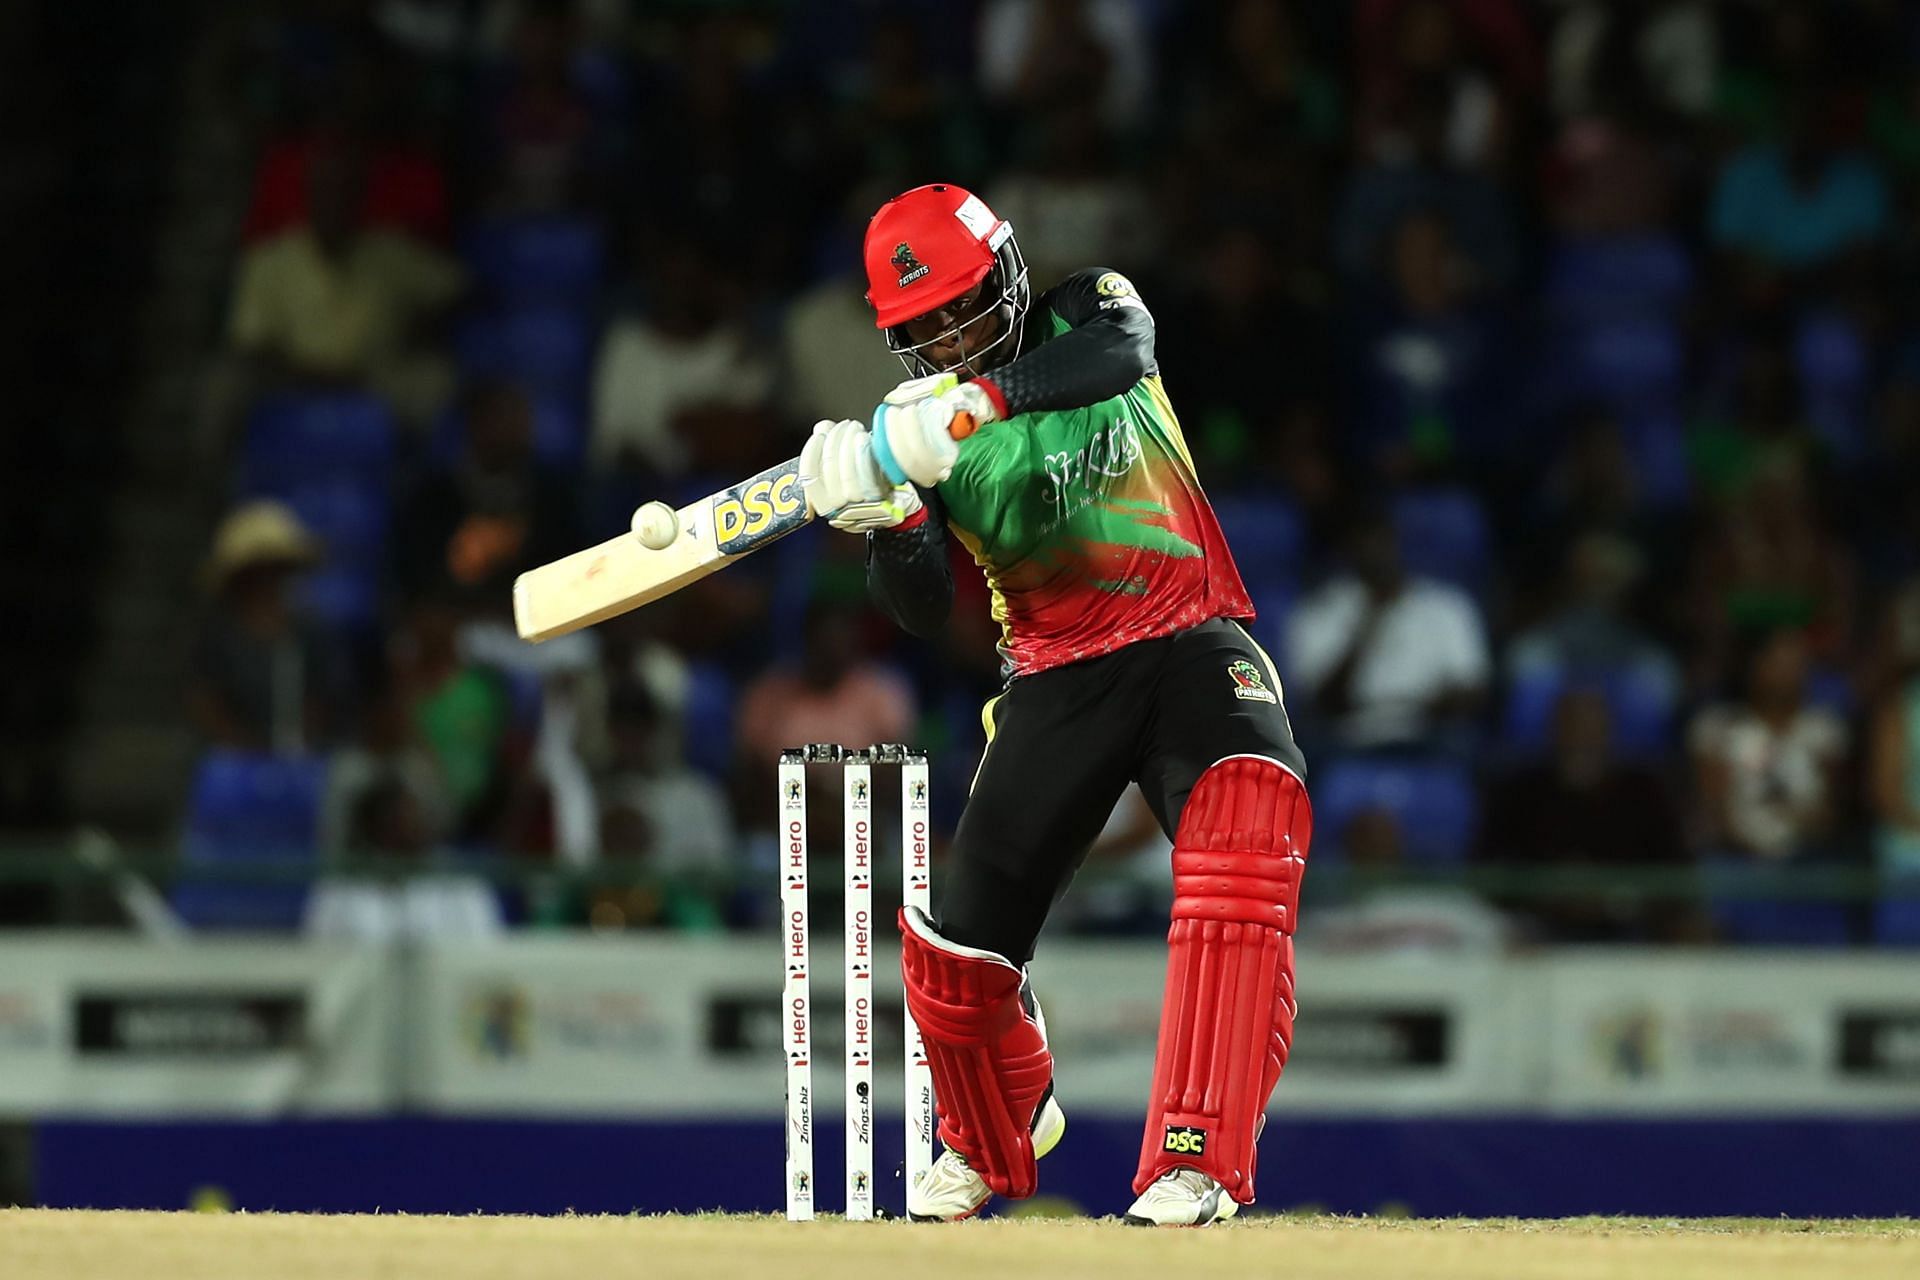 Fabian Allen can attract good price at the IPL auctions